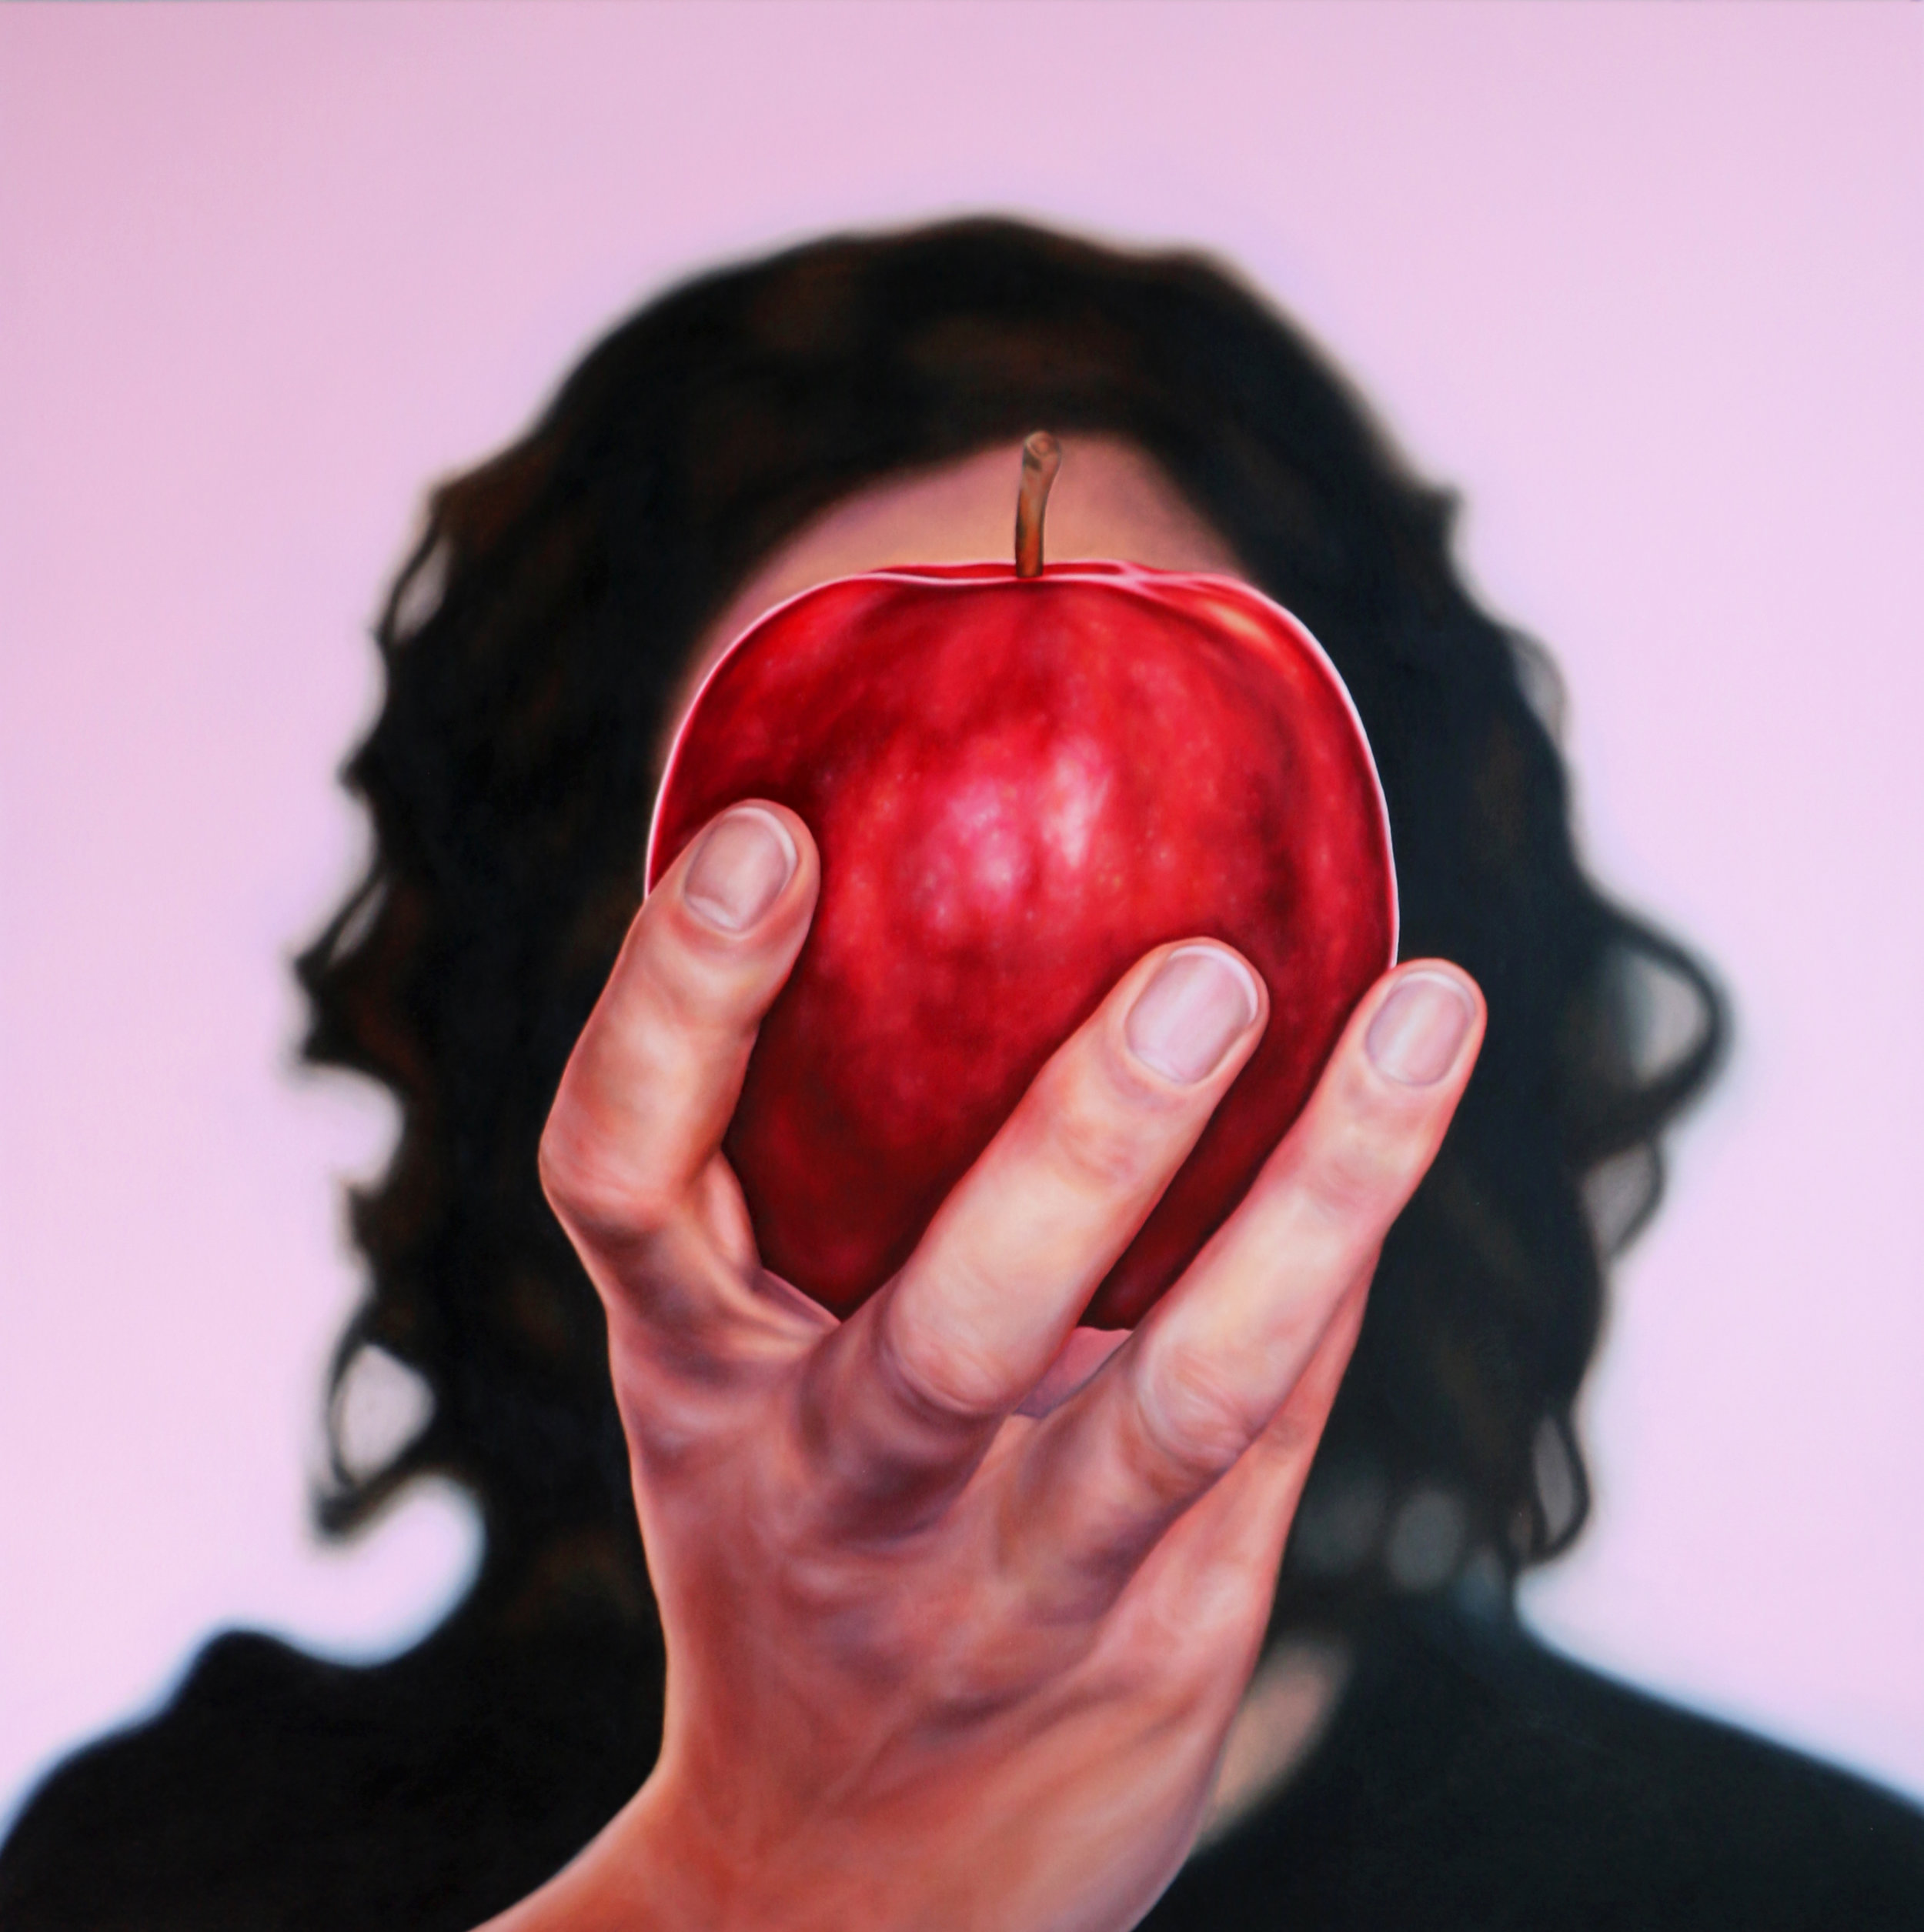 I'll Be the Apple of Your Eye: Homage to Magritte